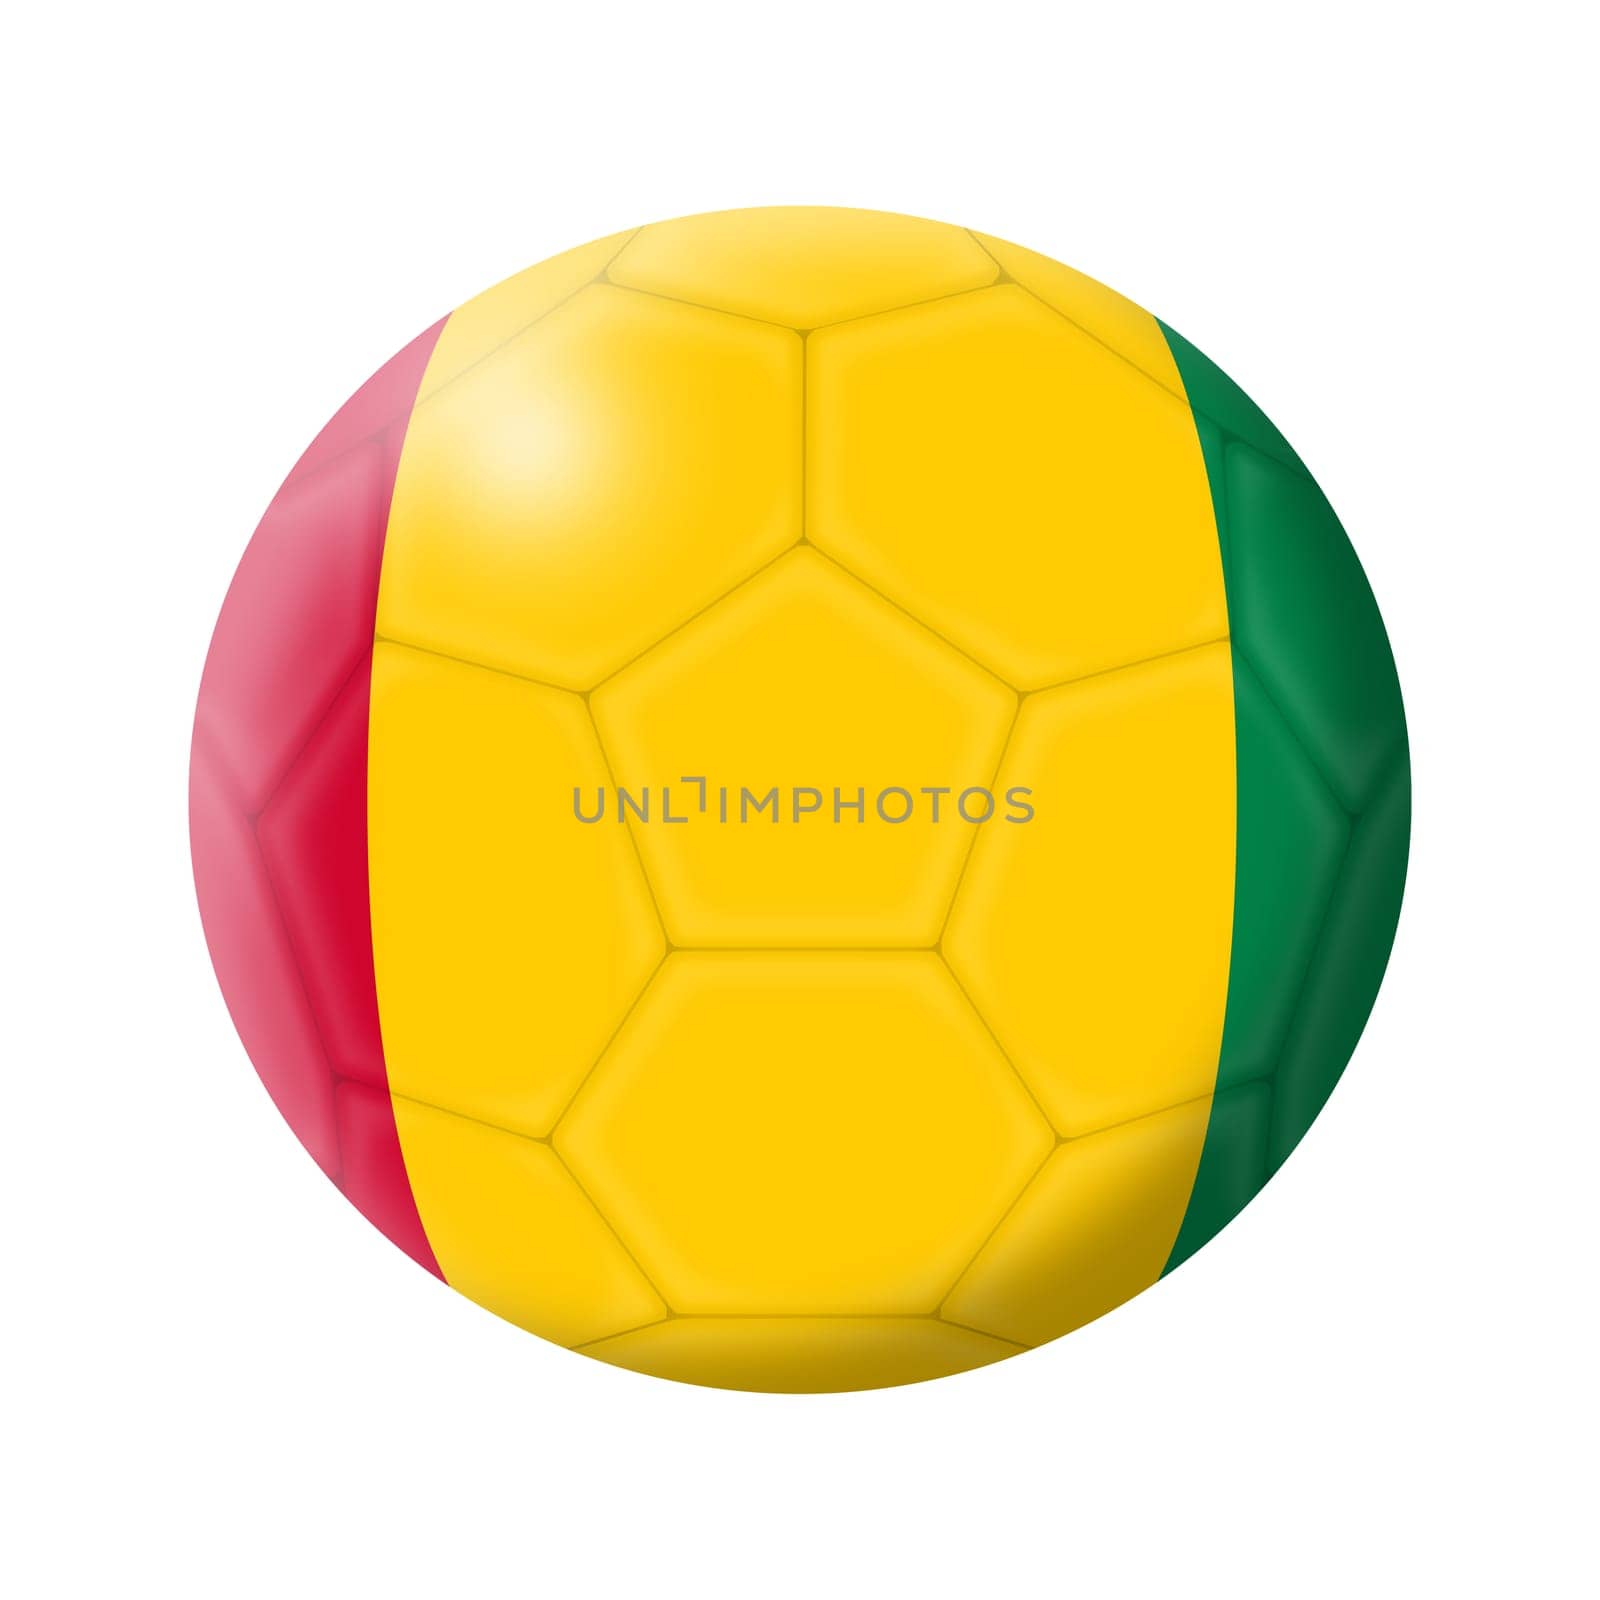 A Guinea soccer ball football 3d illustration isolated on white with clipping path